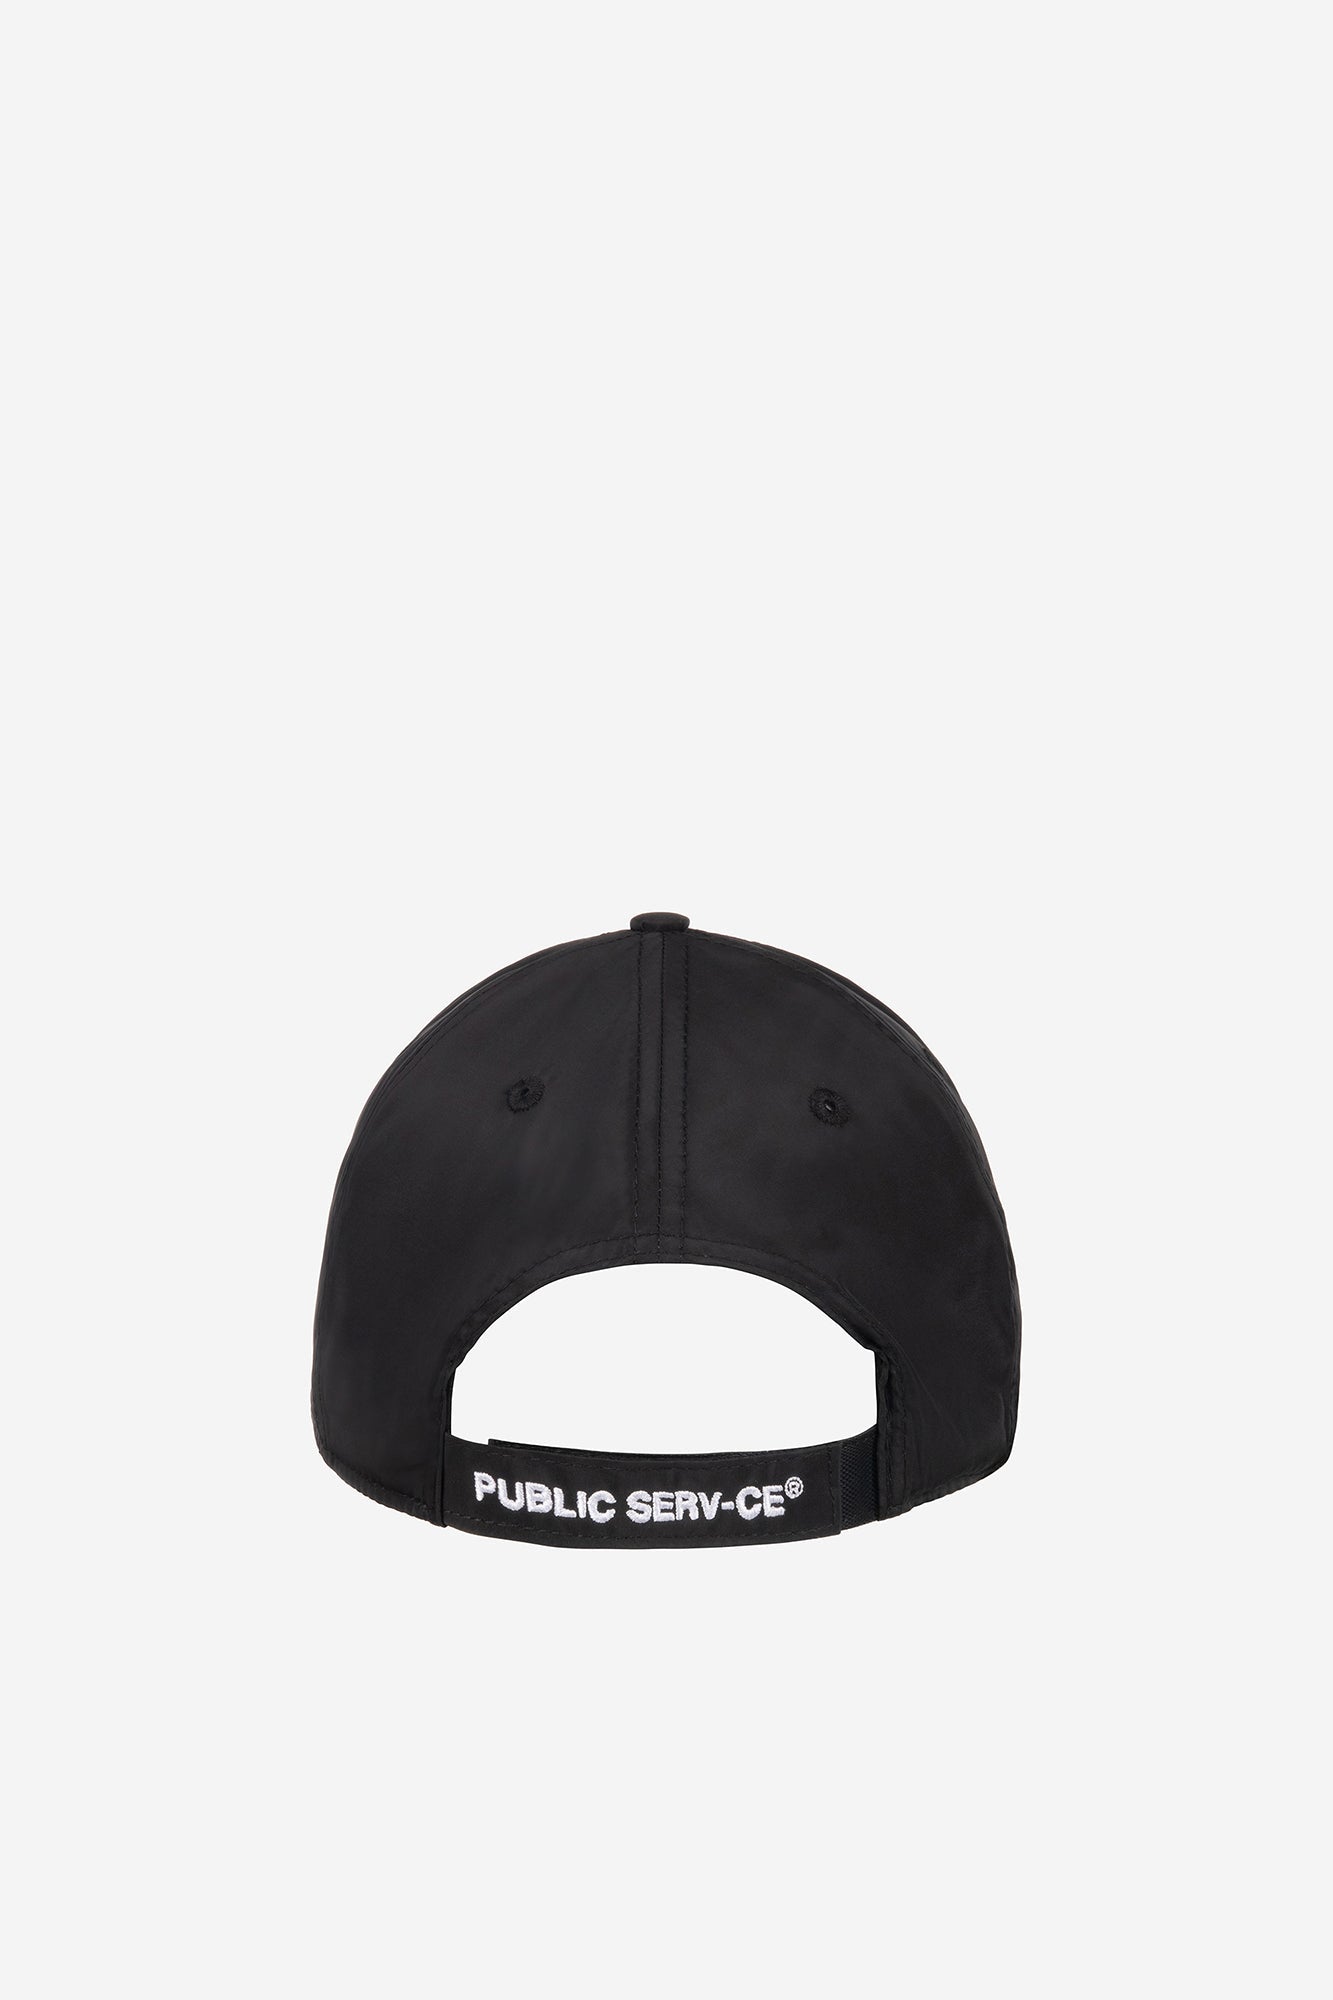 alt="back of black cap with logo embroidered on cap strap"